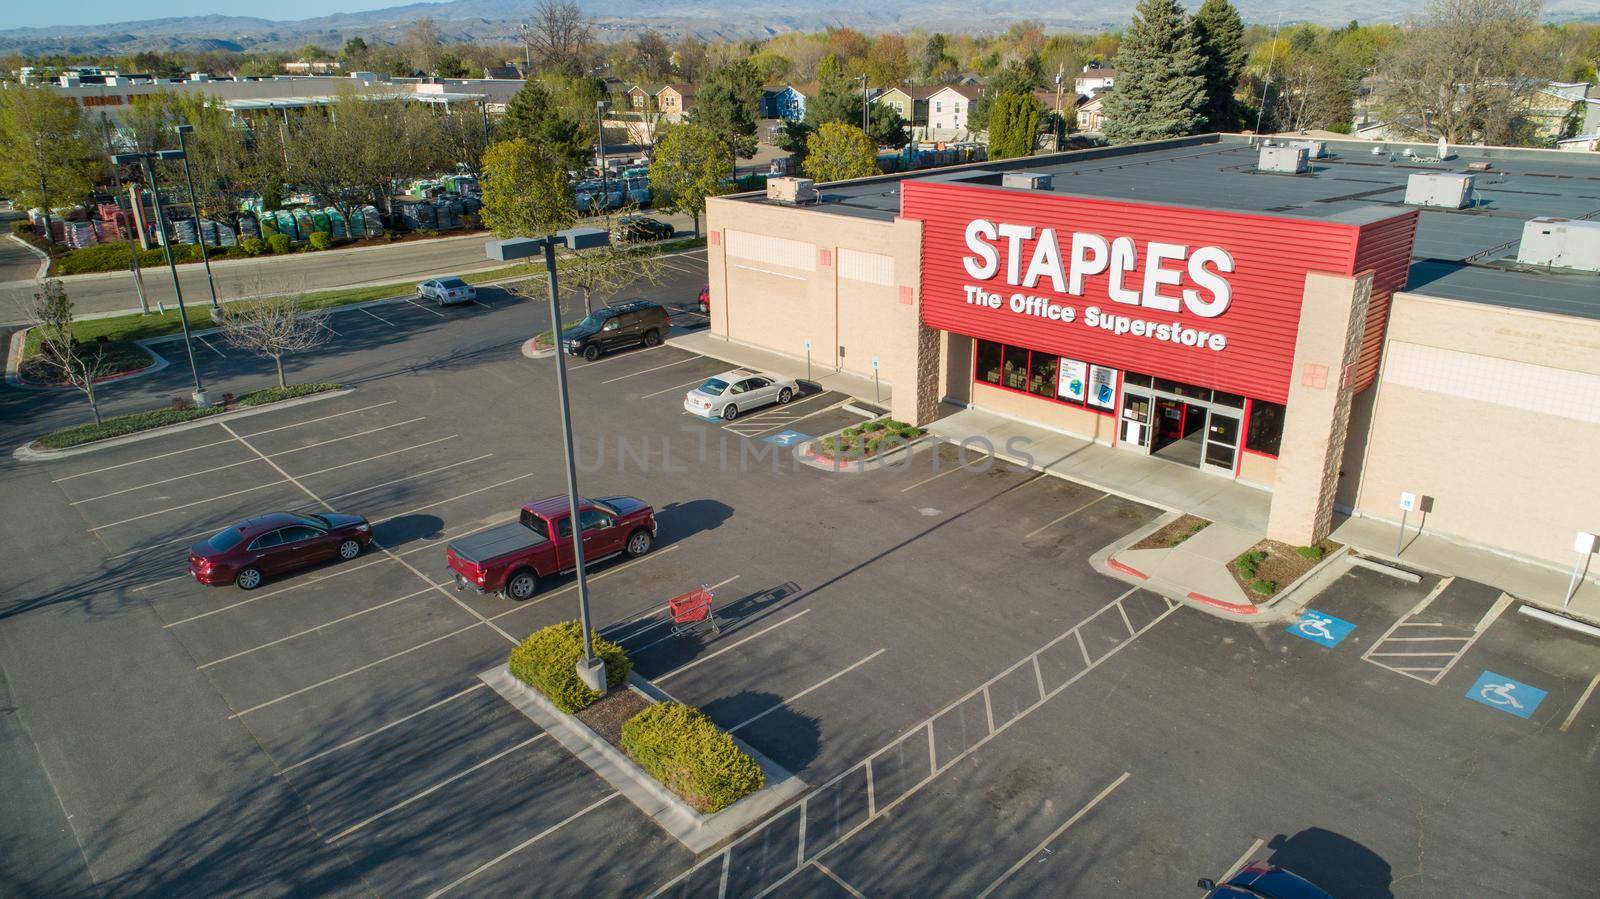 NAMPA, IDAHO - APRIL 23, 2021: Aerial view of a Staples store which is one of the largest office supply chains in the US